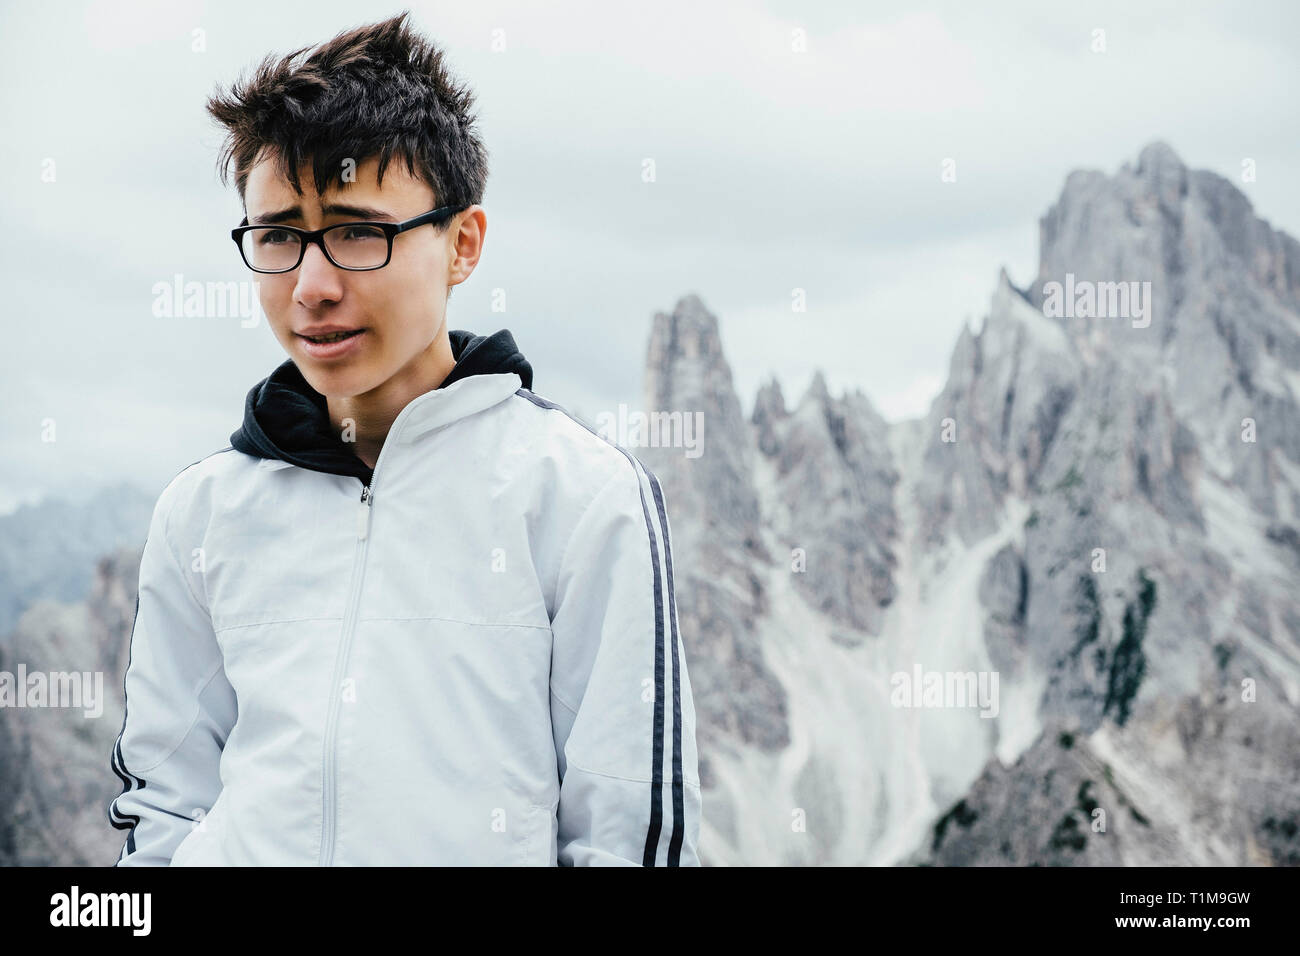 Teenage boy standing at rugged mountain peaks, Drei Zinnen Nature Park, South Tyrol, Italy Stock Photo